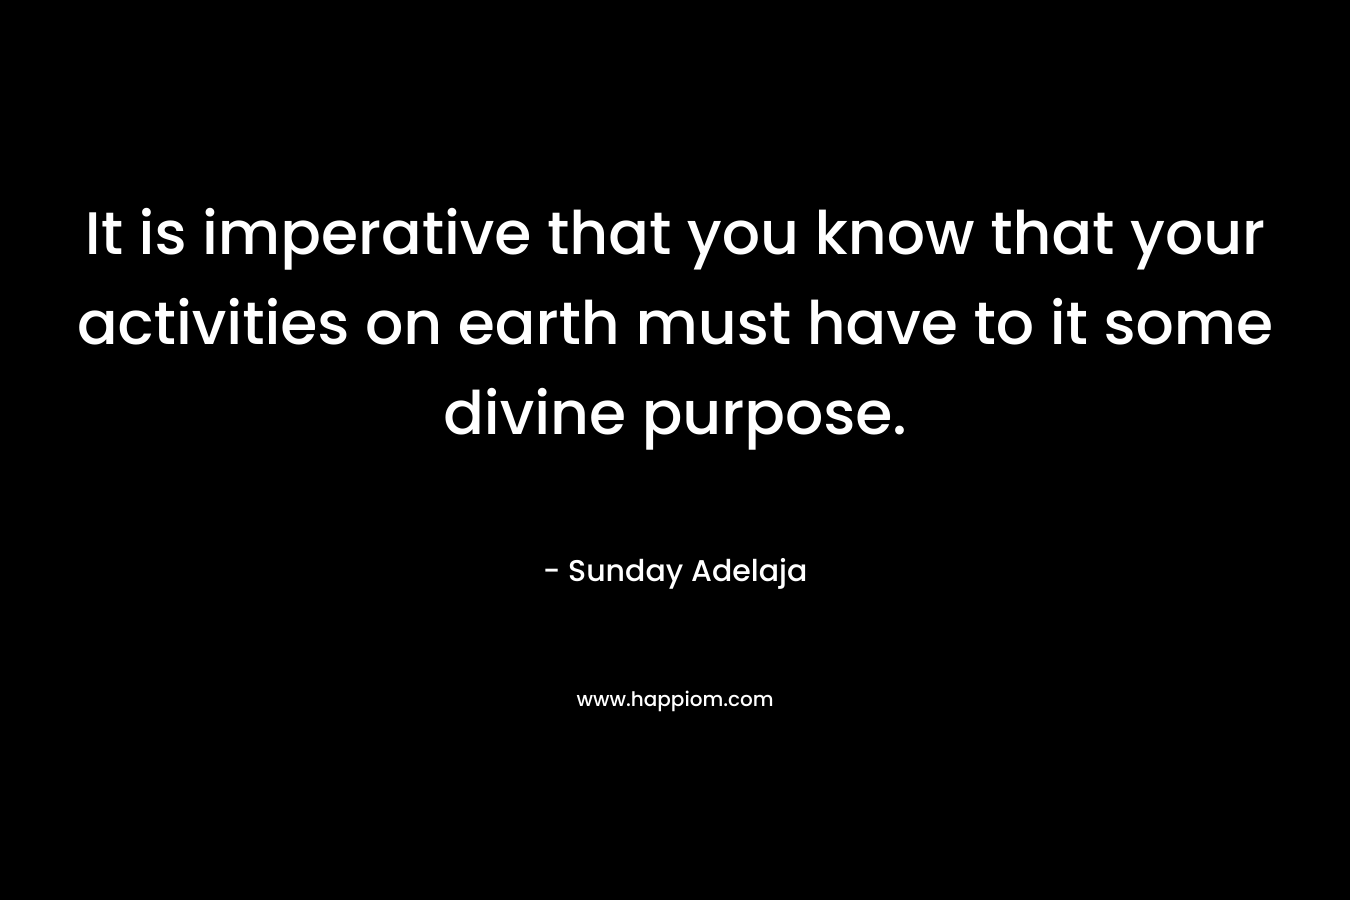 It is imperative that you know that your activities on earth must have to it some divine purpose.